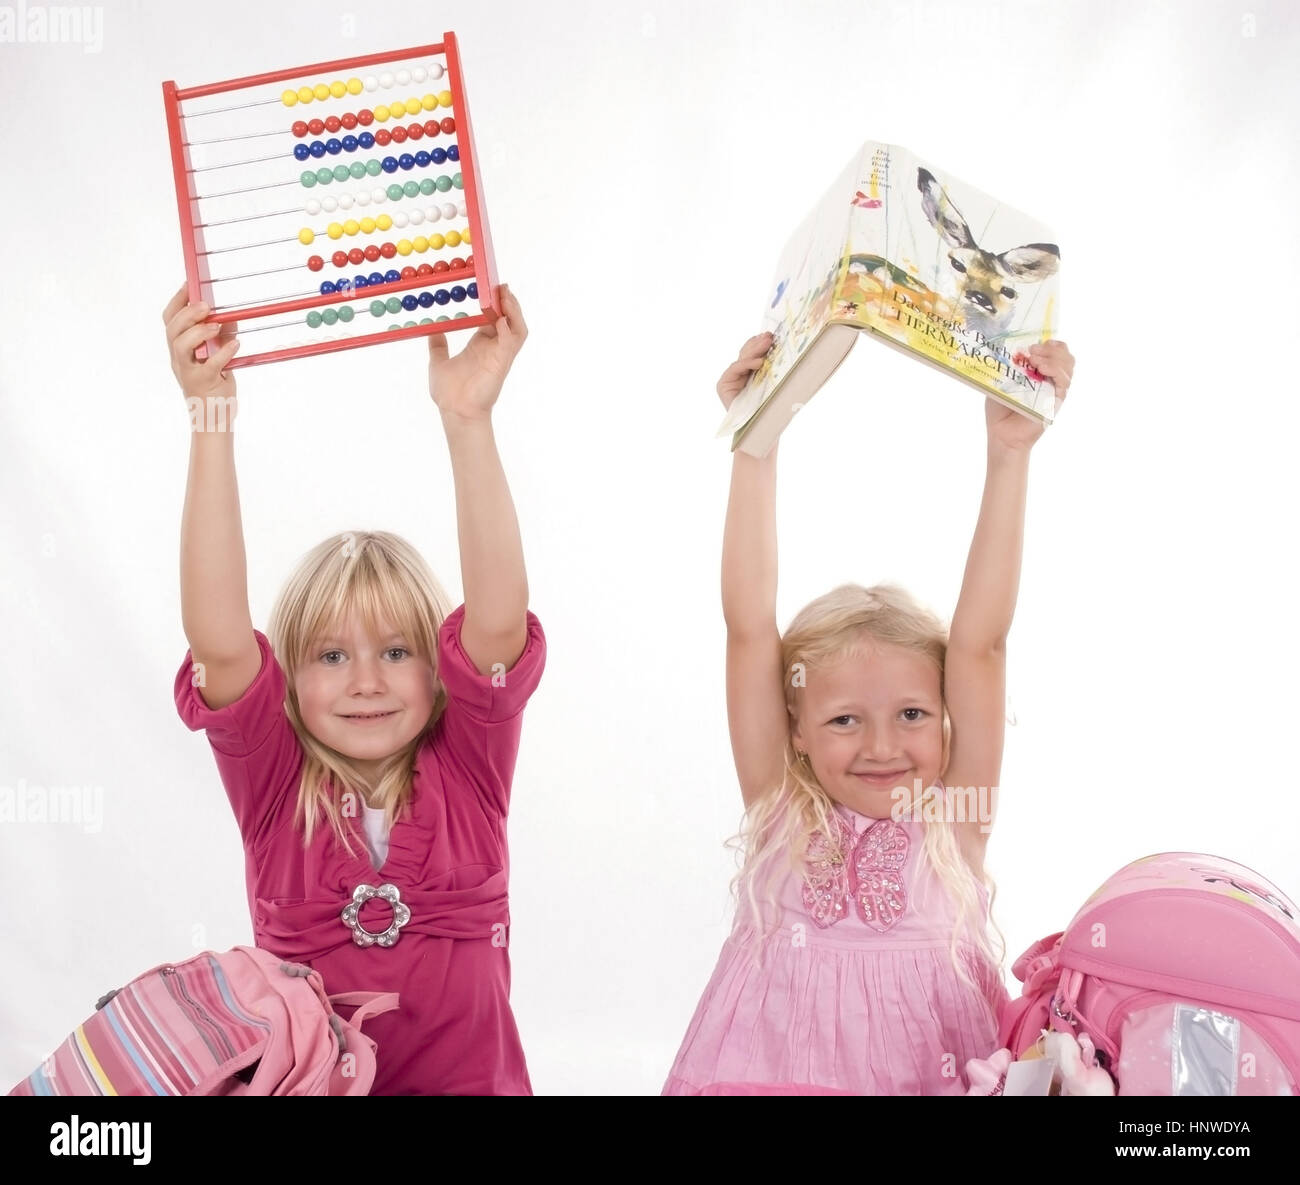 Model release, Zwei Schulmaedchen mit Lesebuch und Abakus - two schoolgirls with book and abacus Stock Photo